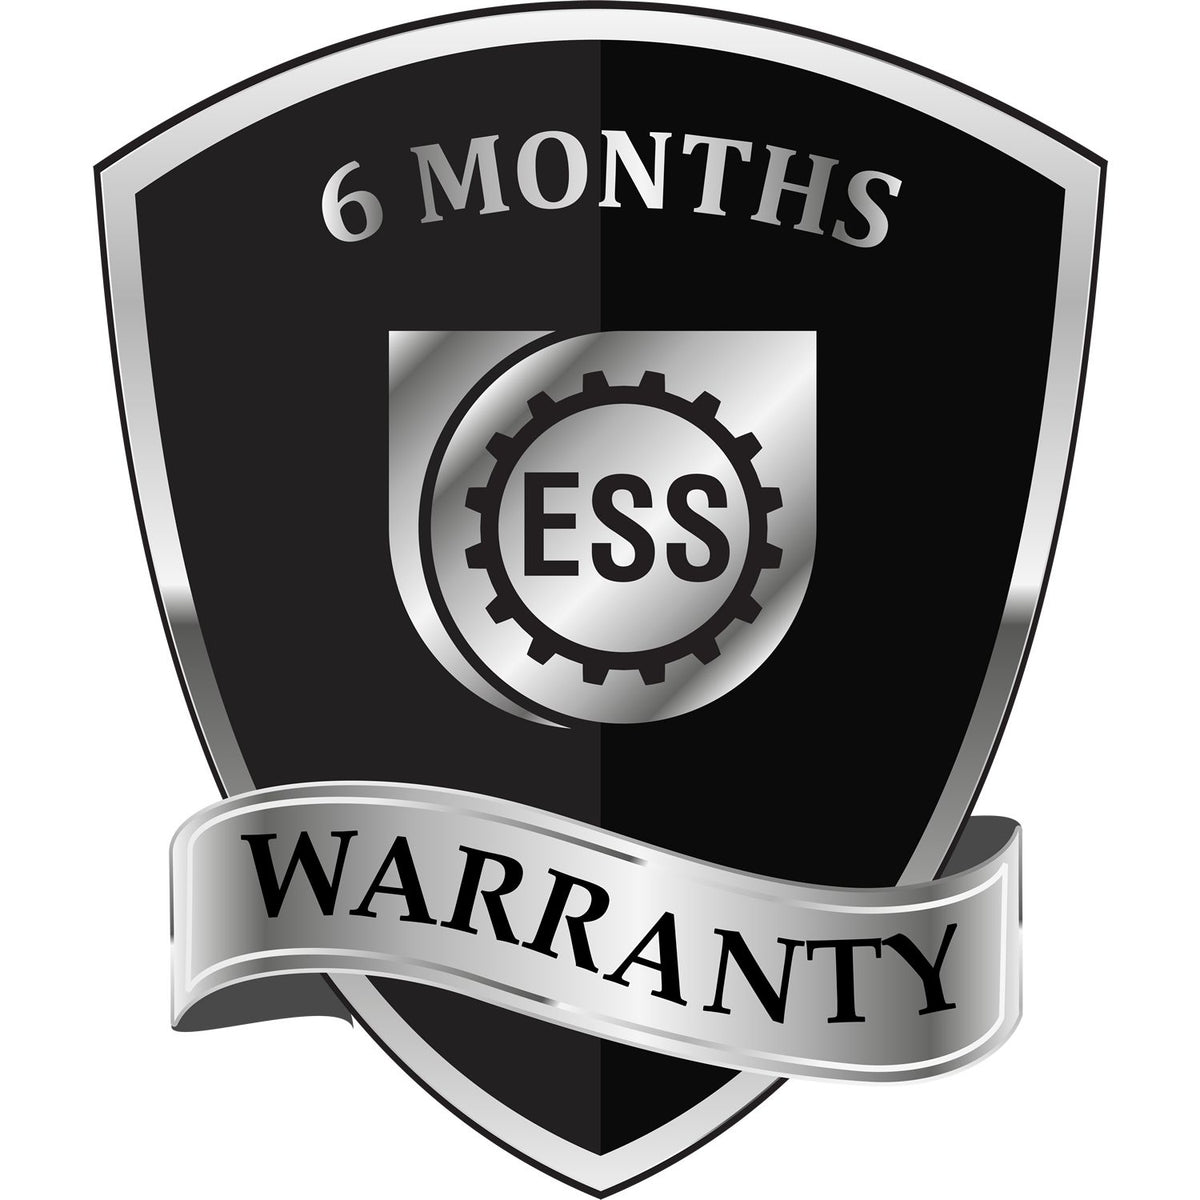 A badge or emblem showing a warranty icon for the PSI Maine Notary Stamp